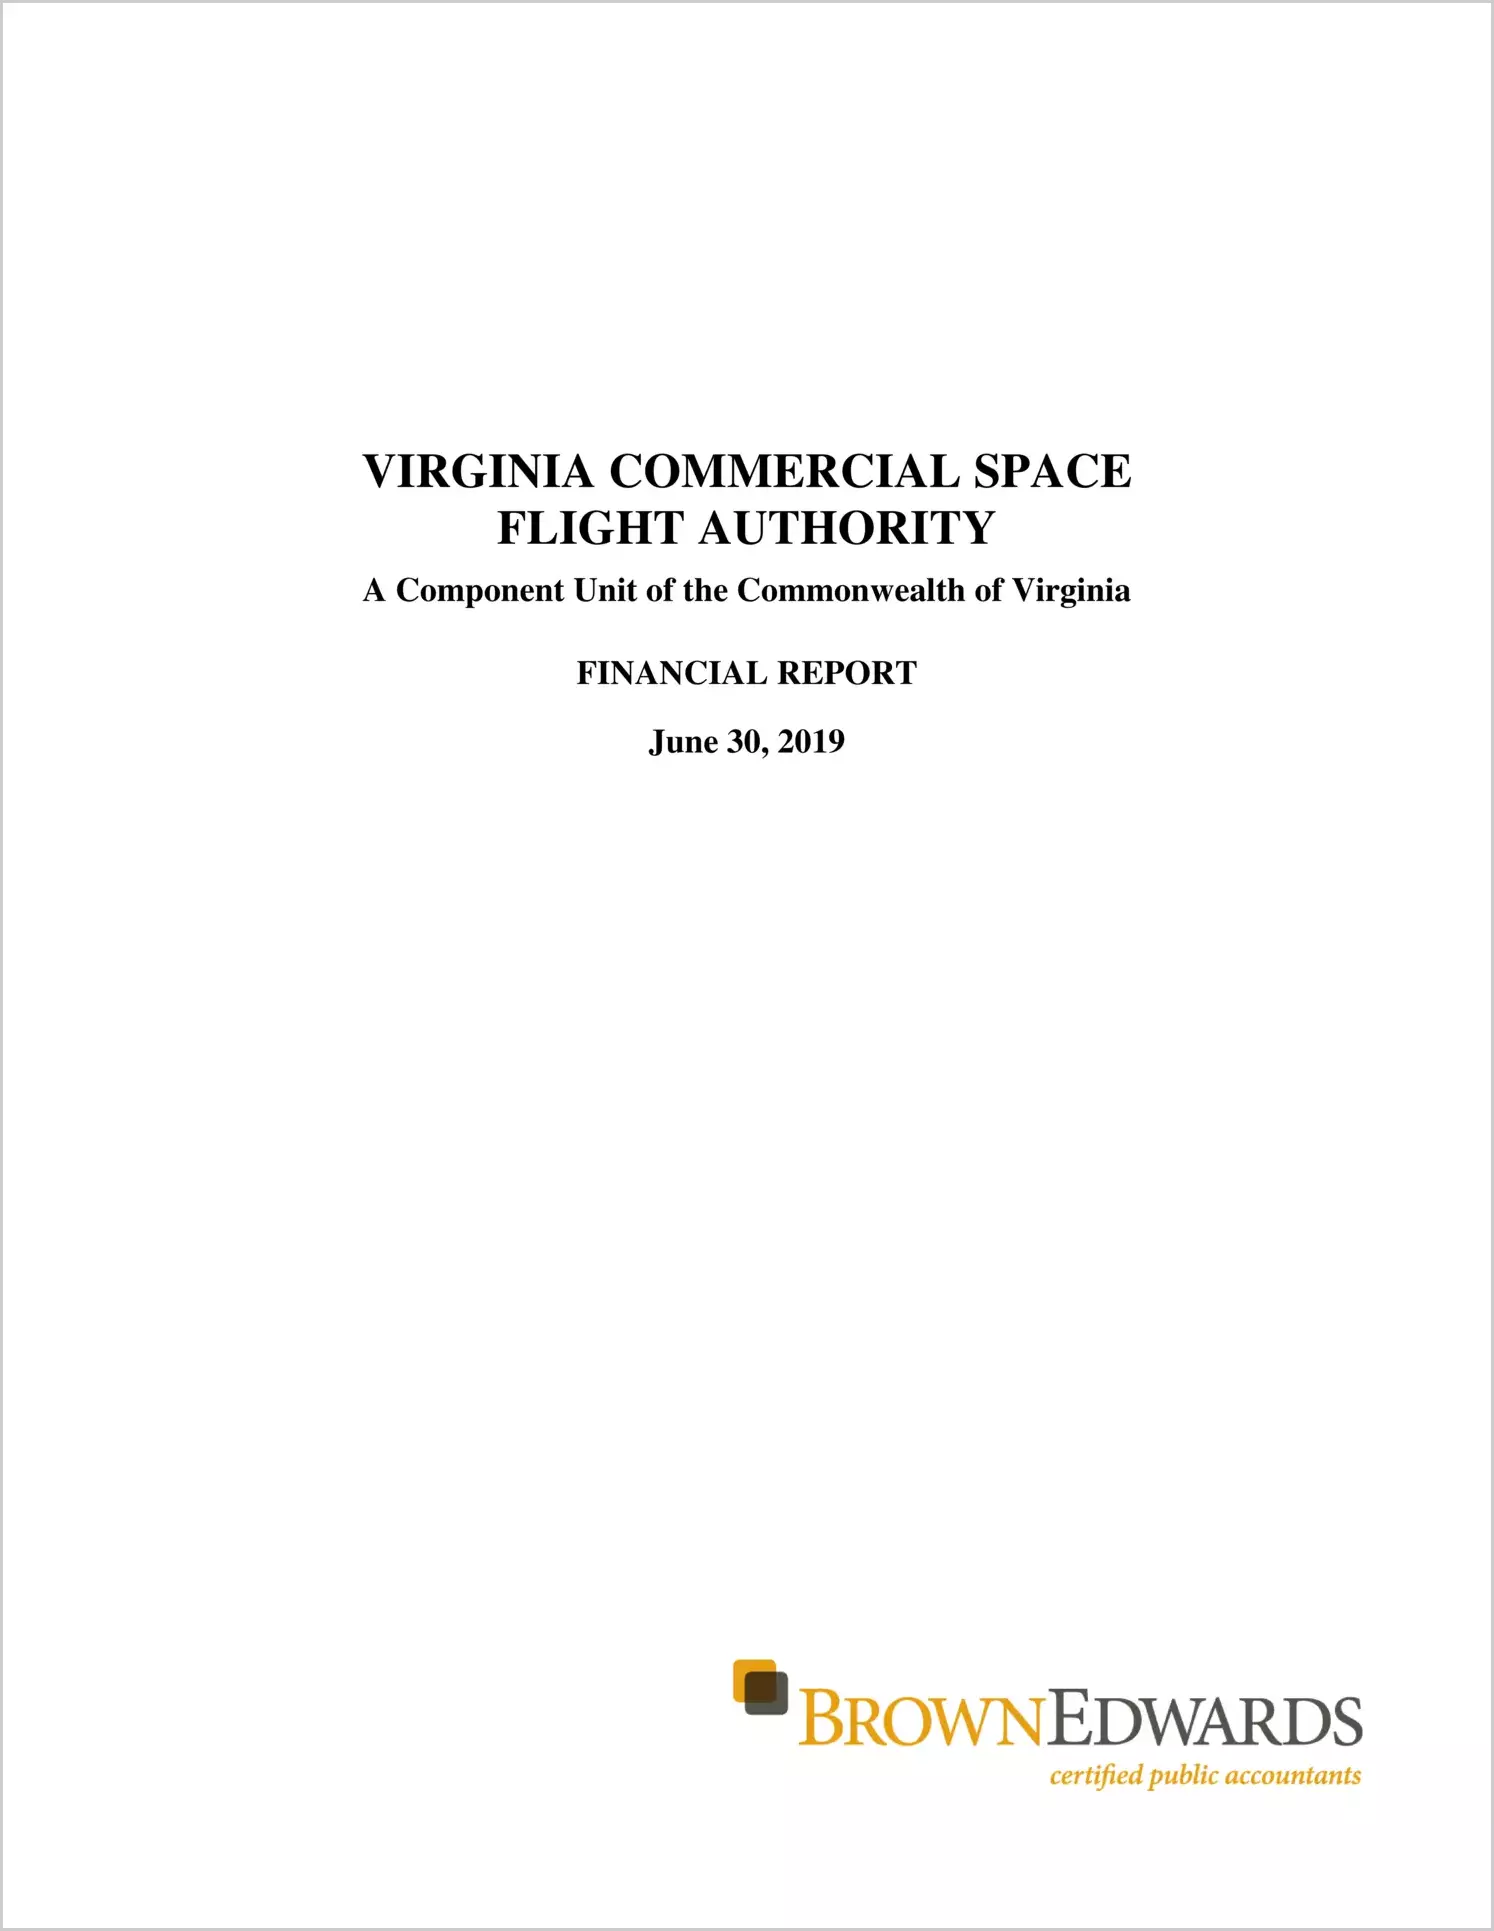 Virginia Commercial Space Flight Authority Financial Statements for the year ended June 30, 2019